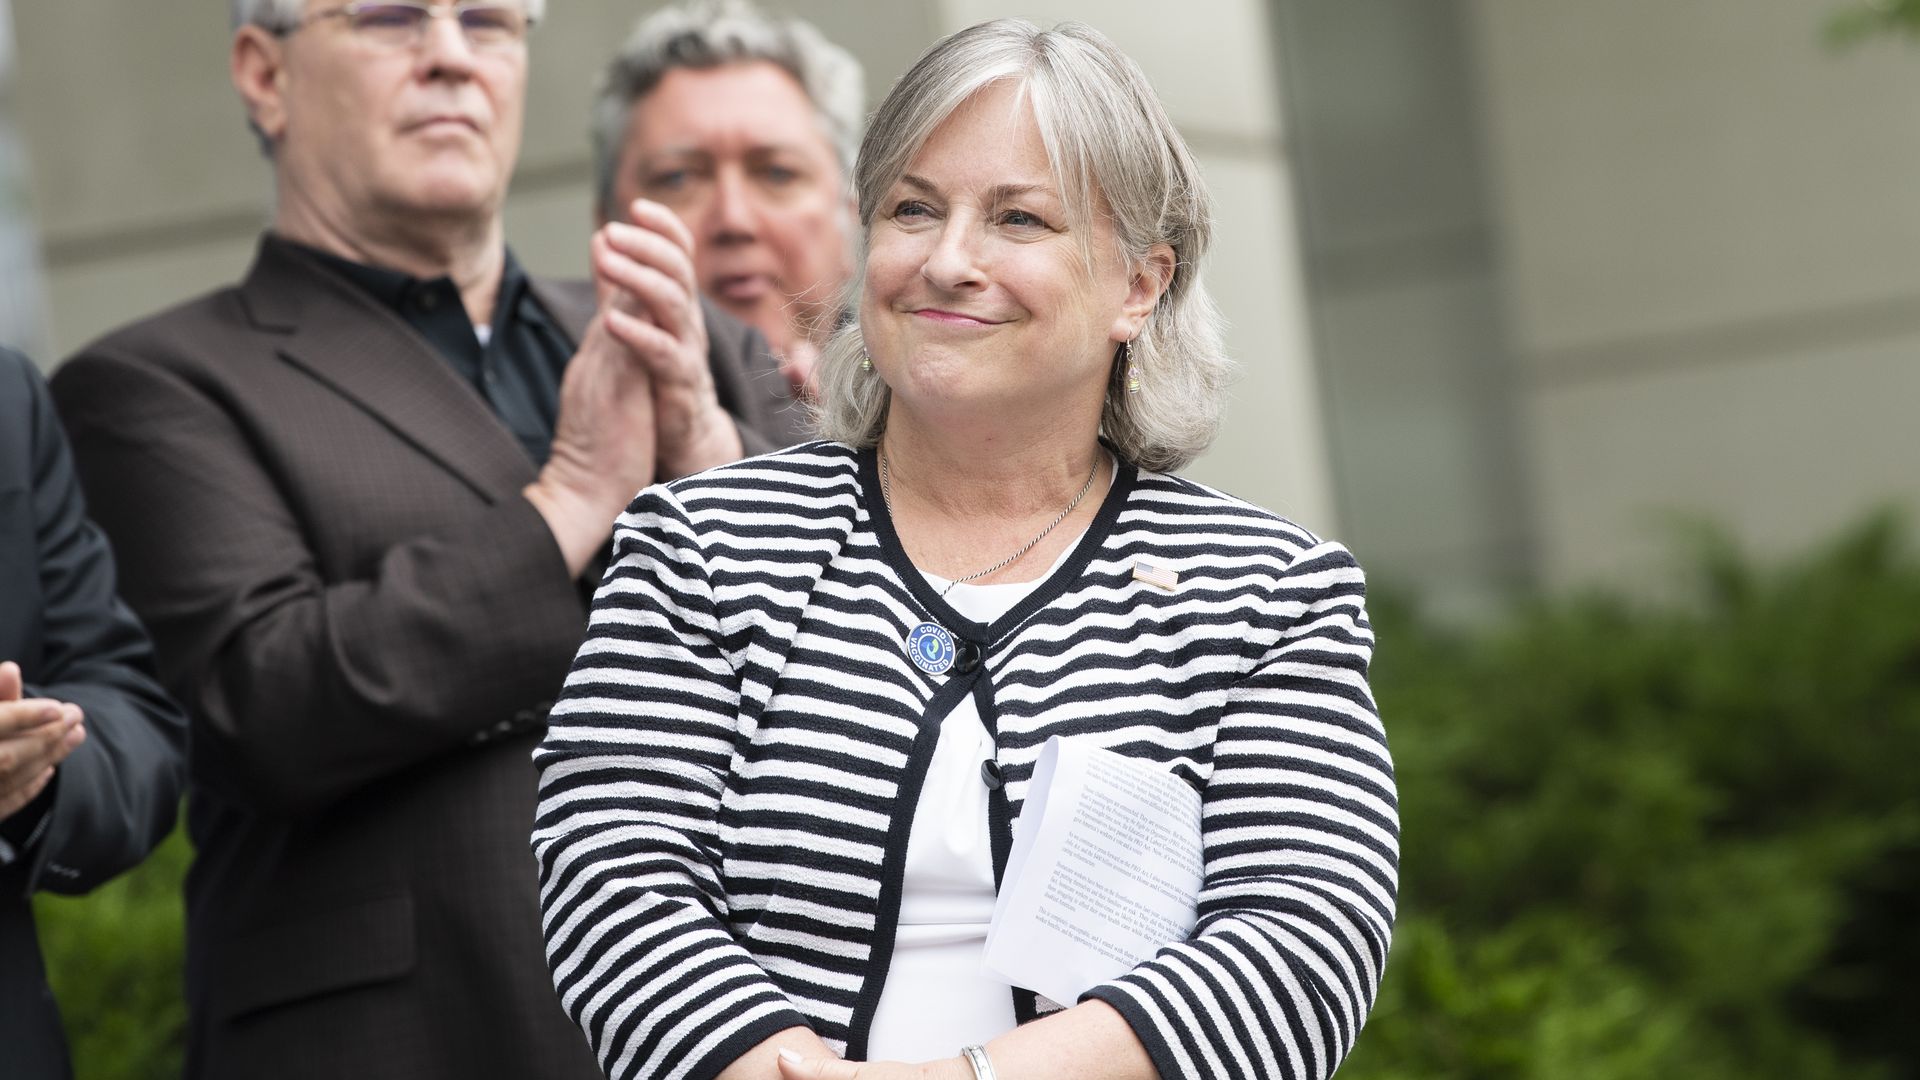 Rep. Susan Wild is seen smiling at a political event.